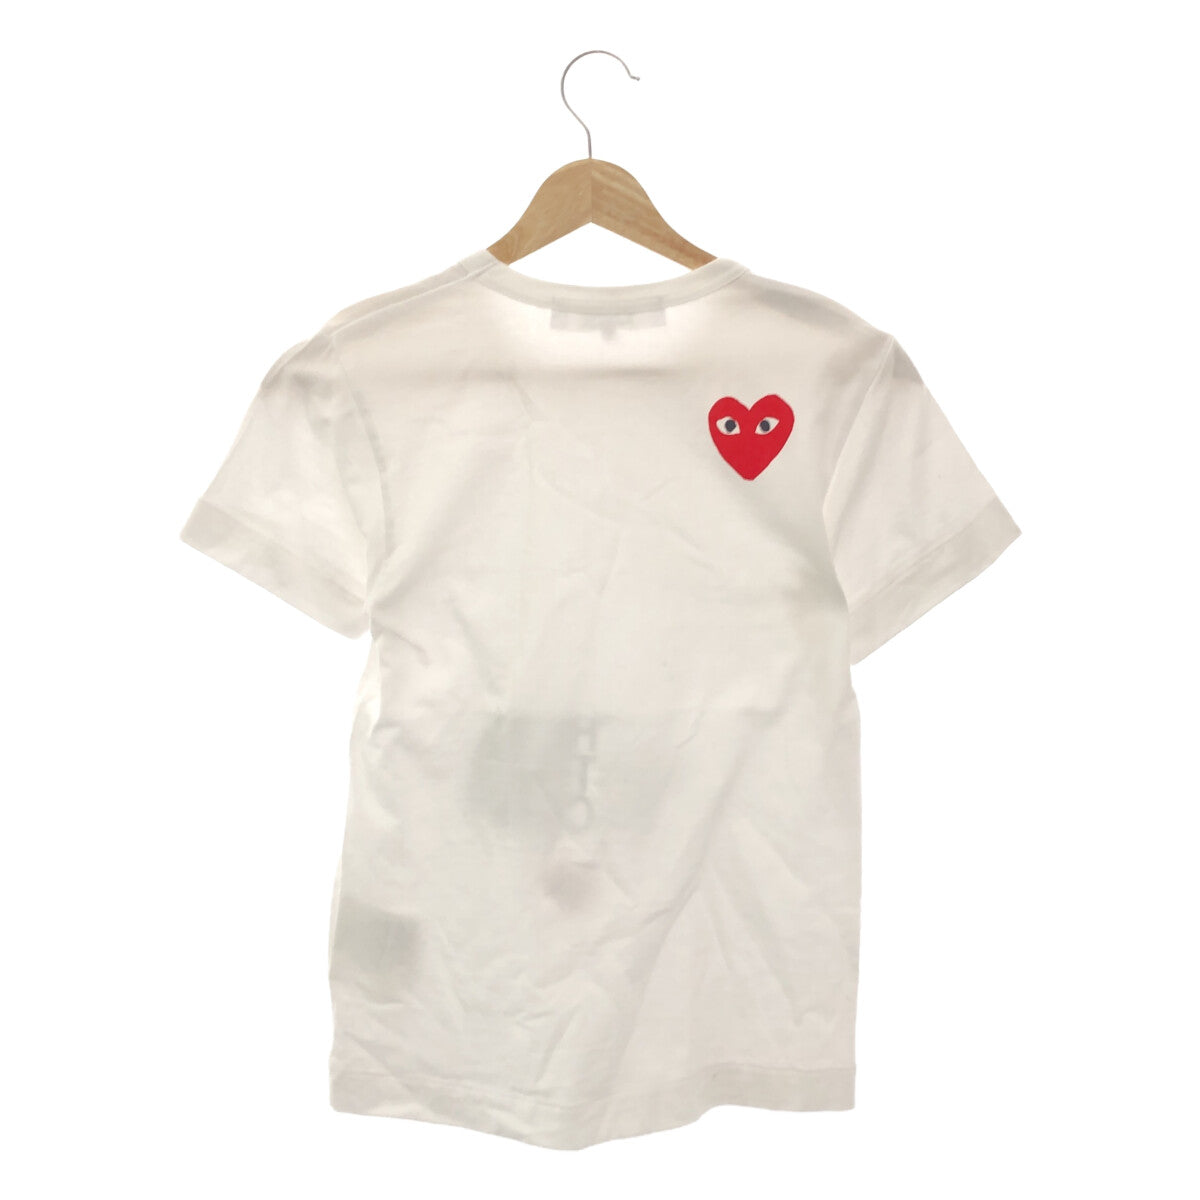 PLAY COMME des GARCONS / プレイコムデギャルソン | 2020SS | × The North Face T-Shirt Tシャツ | S | ホワイト | レディース